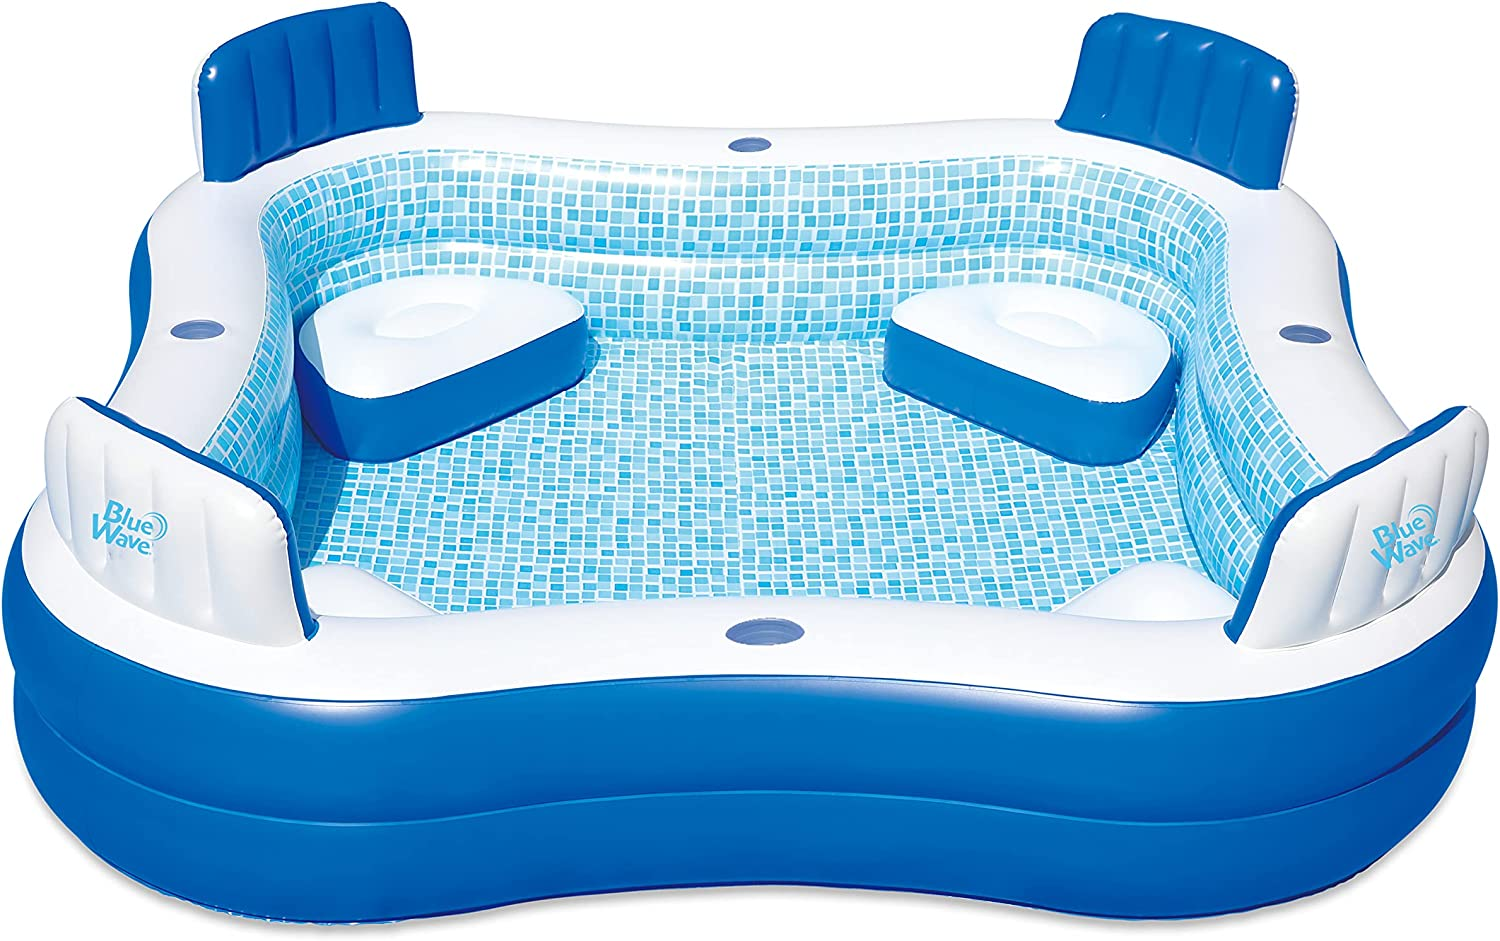 Blue Wave 88-in x 26-in Deep Premier Family Inflatable Pool w/Cover $89.83